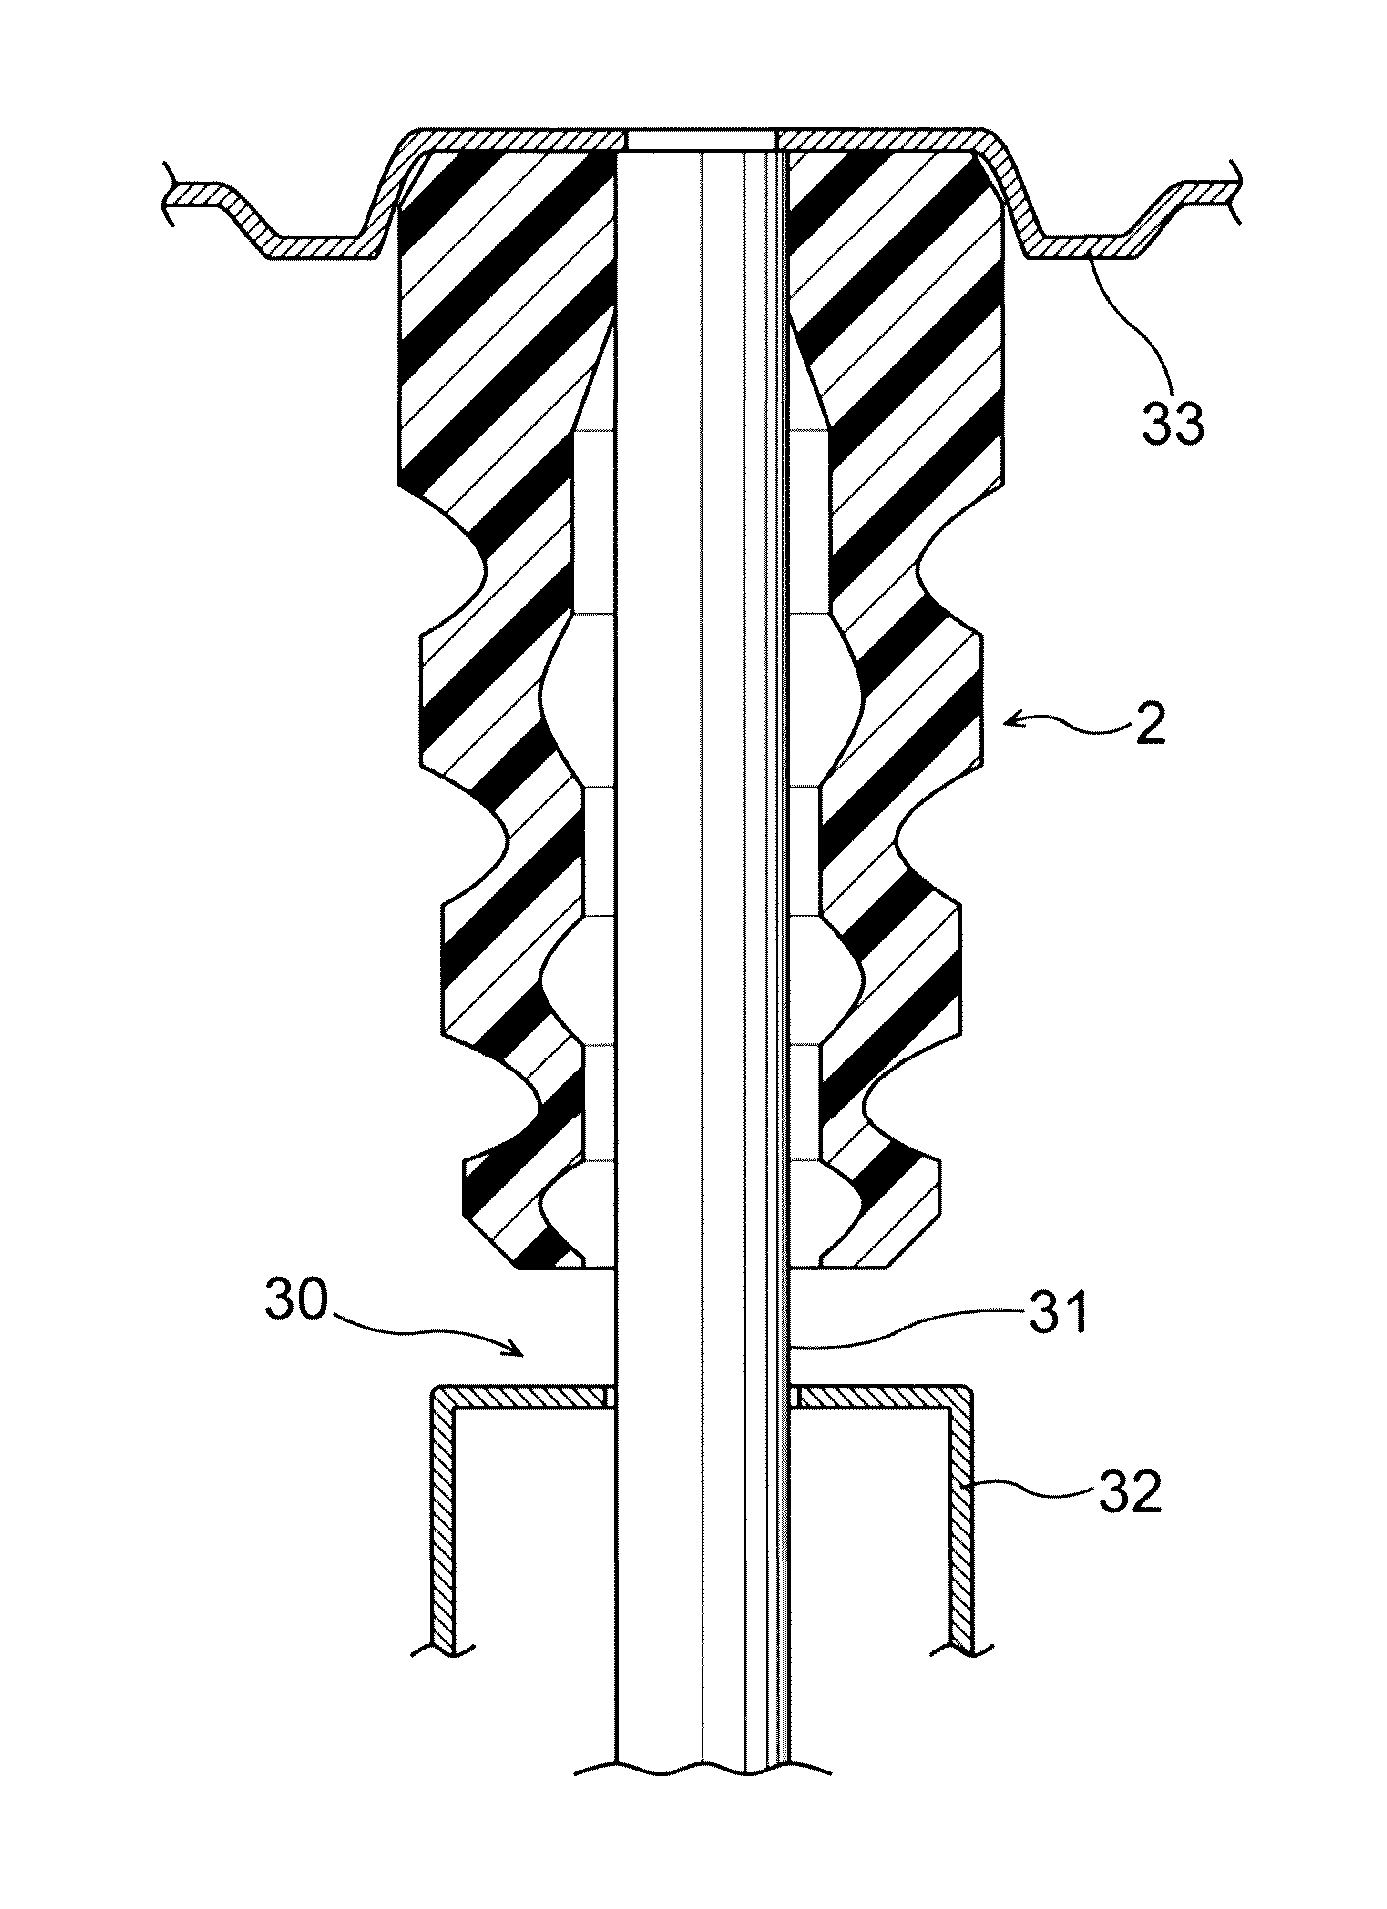 Urethane bumper spring, and method for producing same